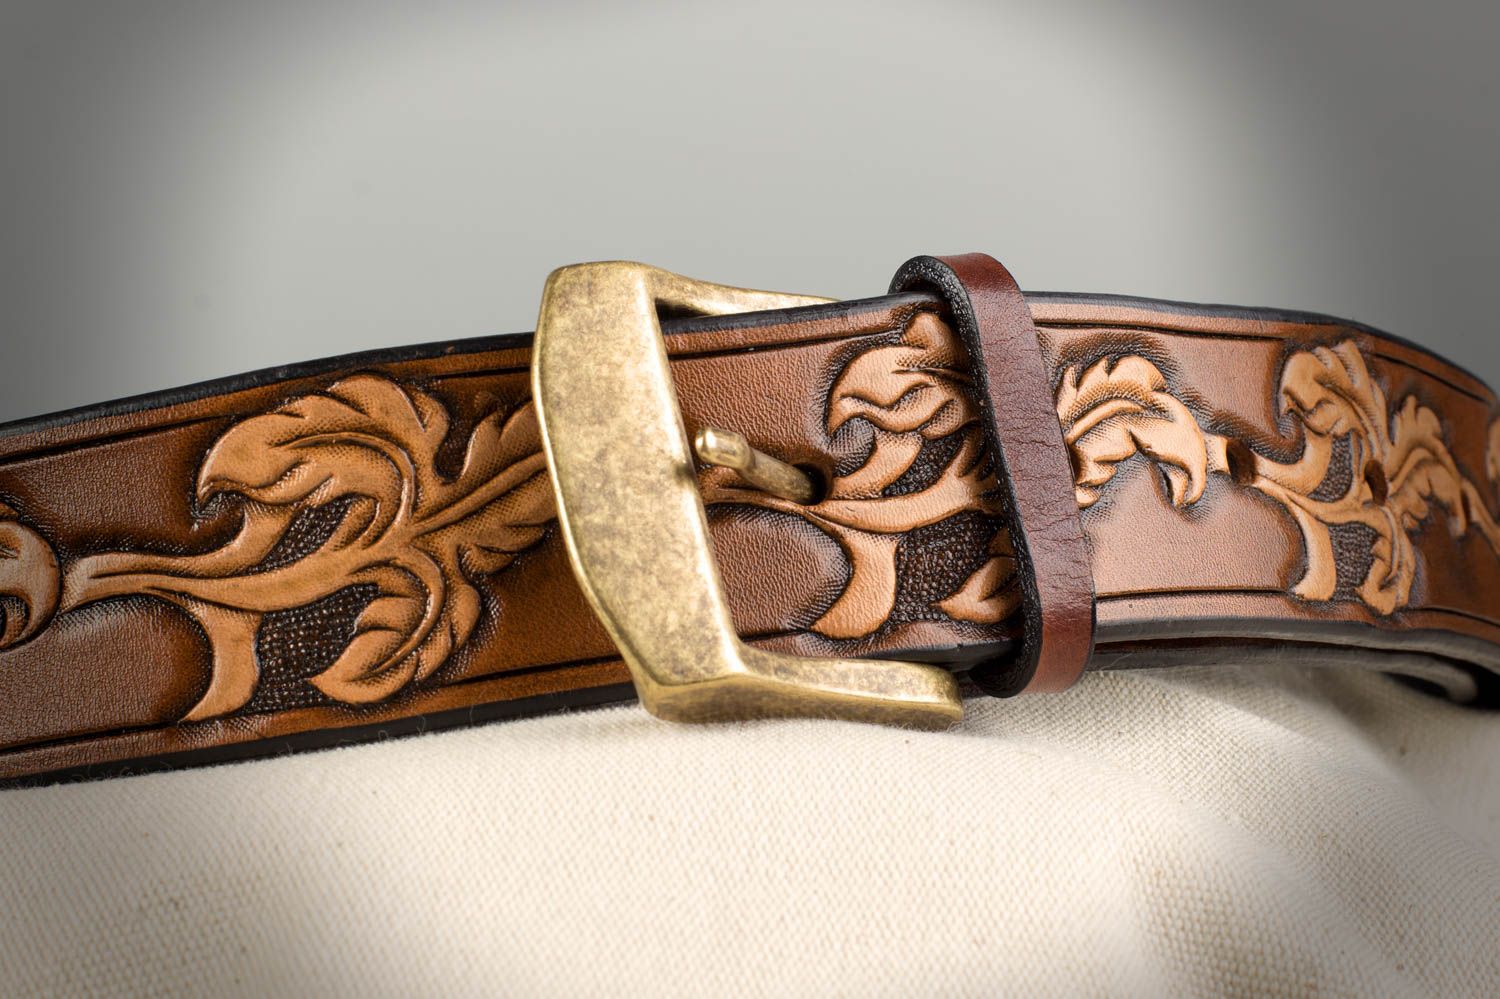 Handmade beautiful belt made of natural leather with metal buckle Ornaments photo 1